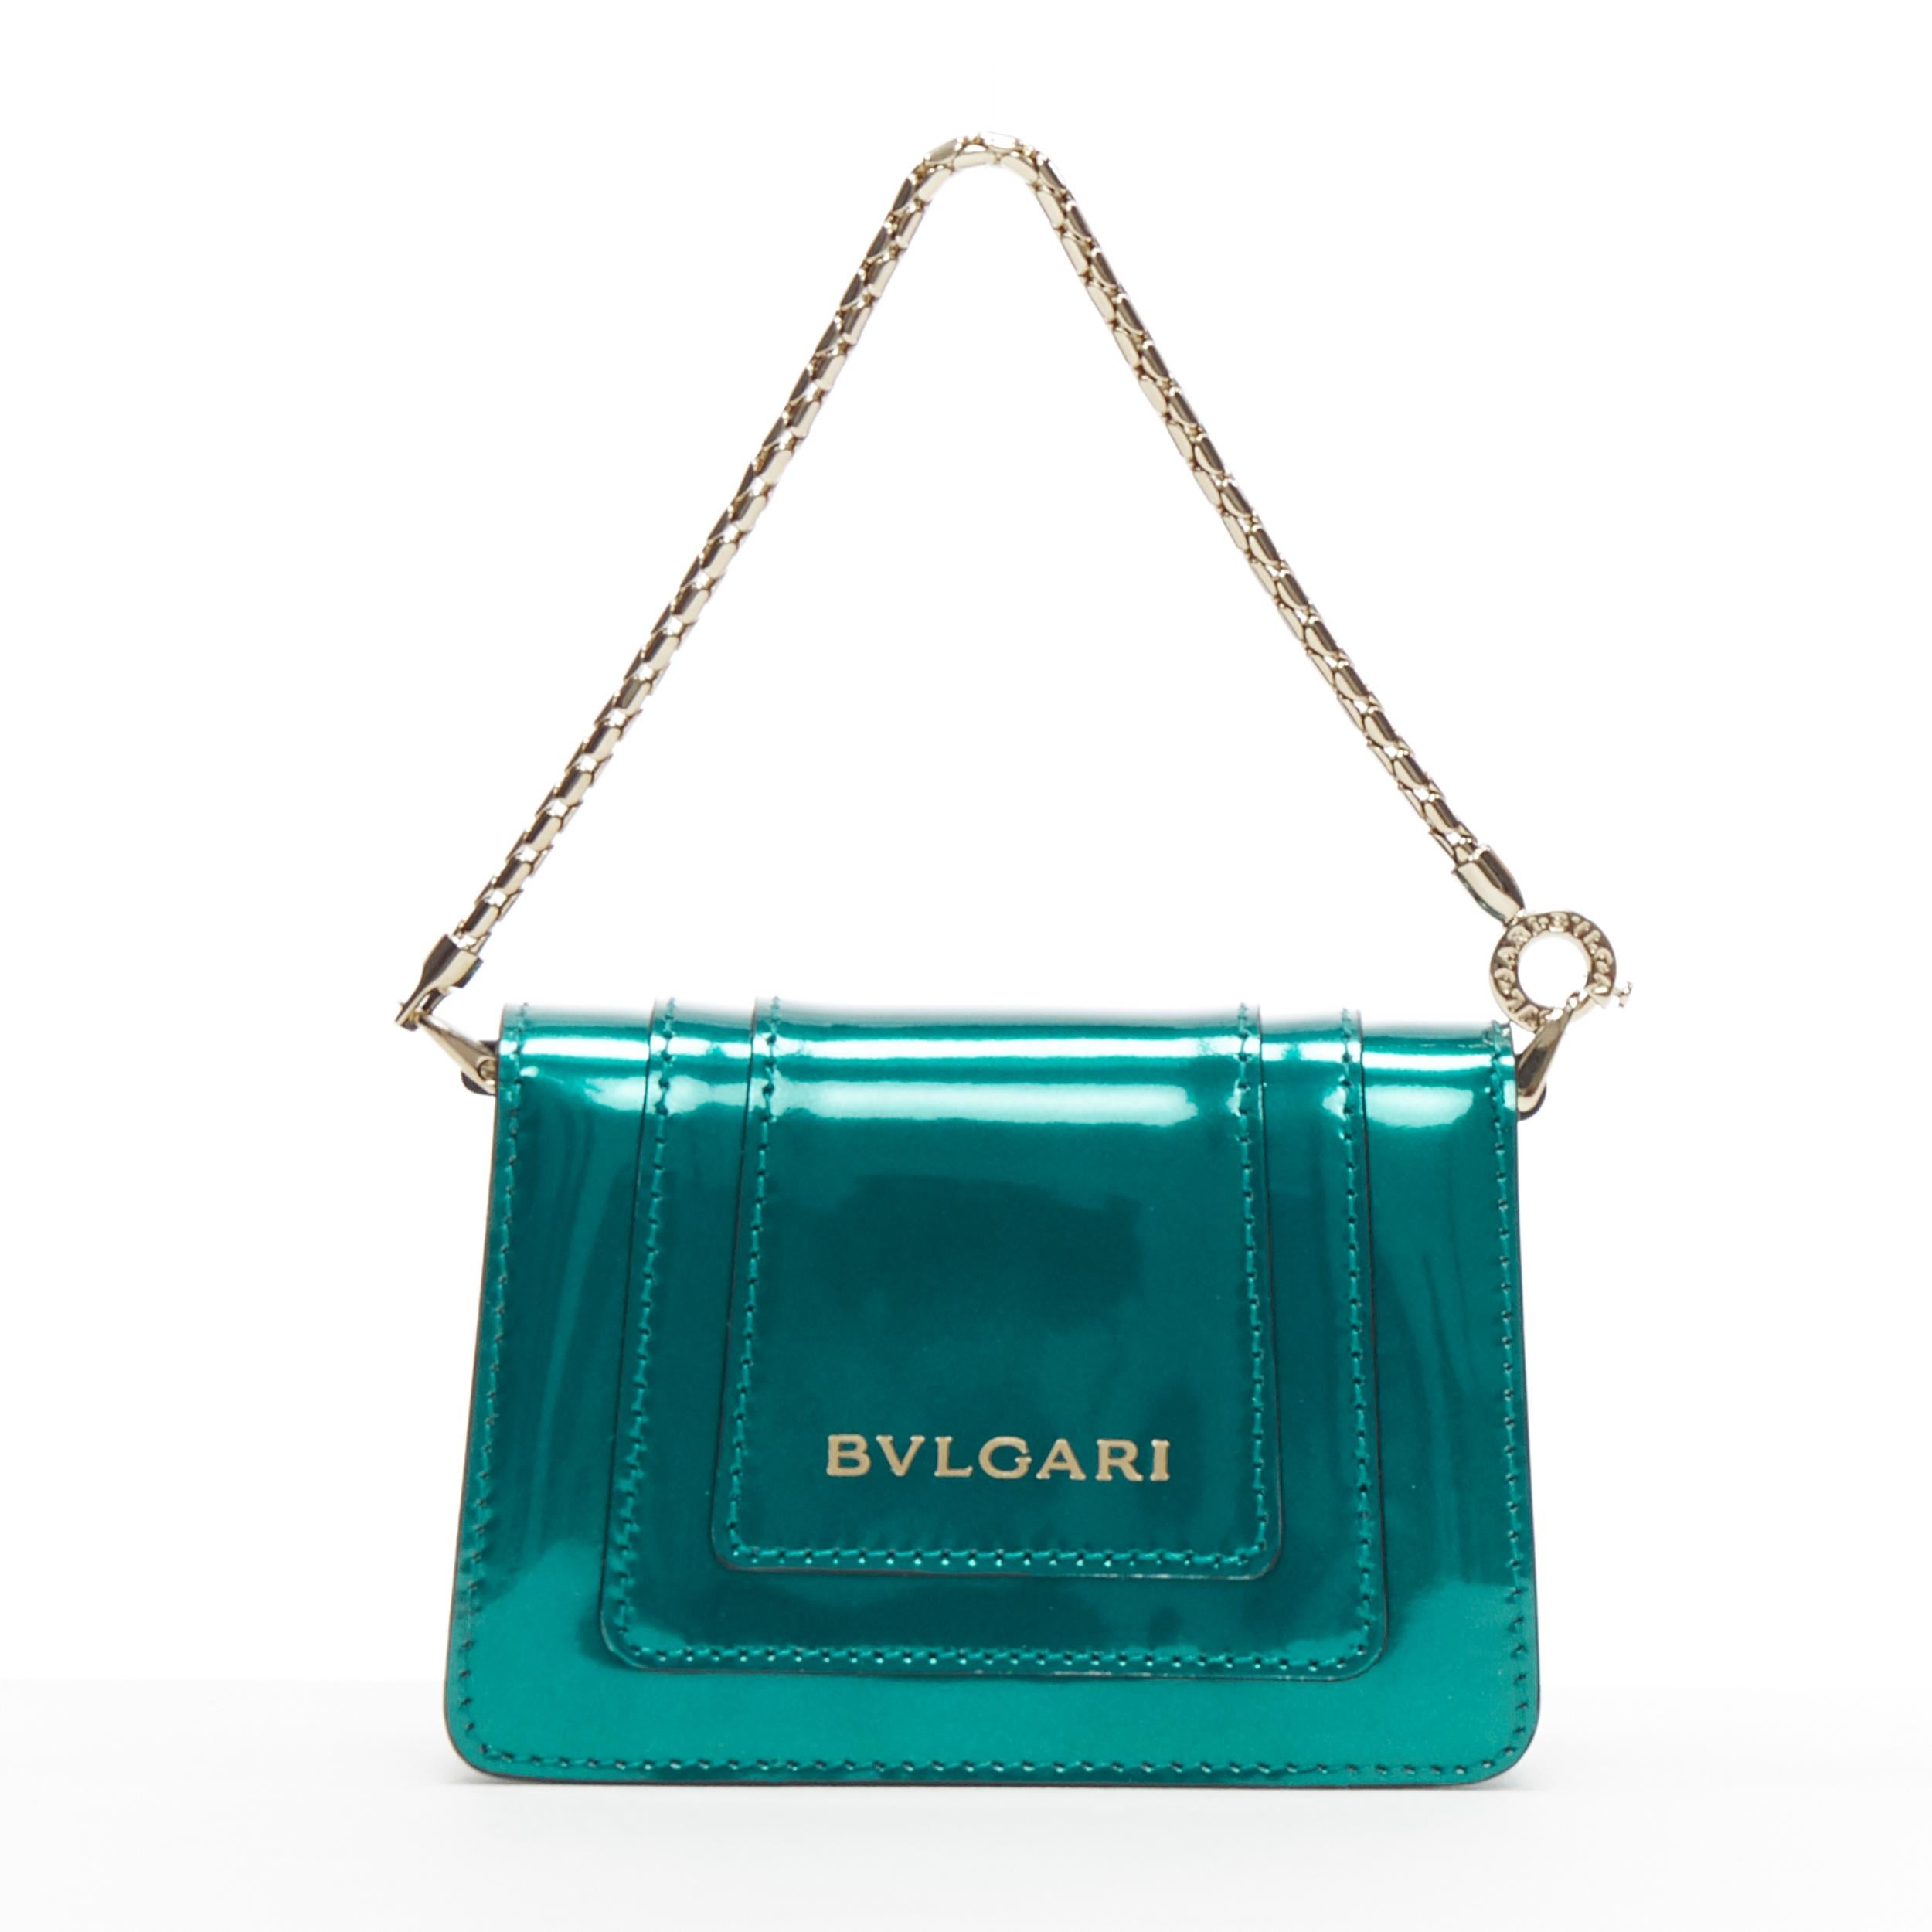 Green new BVLGARI Serpentine Forever emerald green patent snake flap mico bag charm